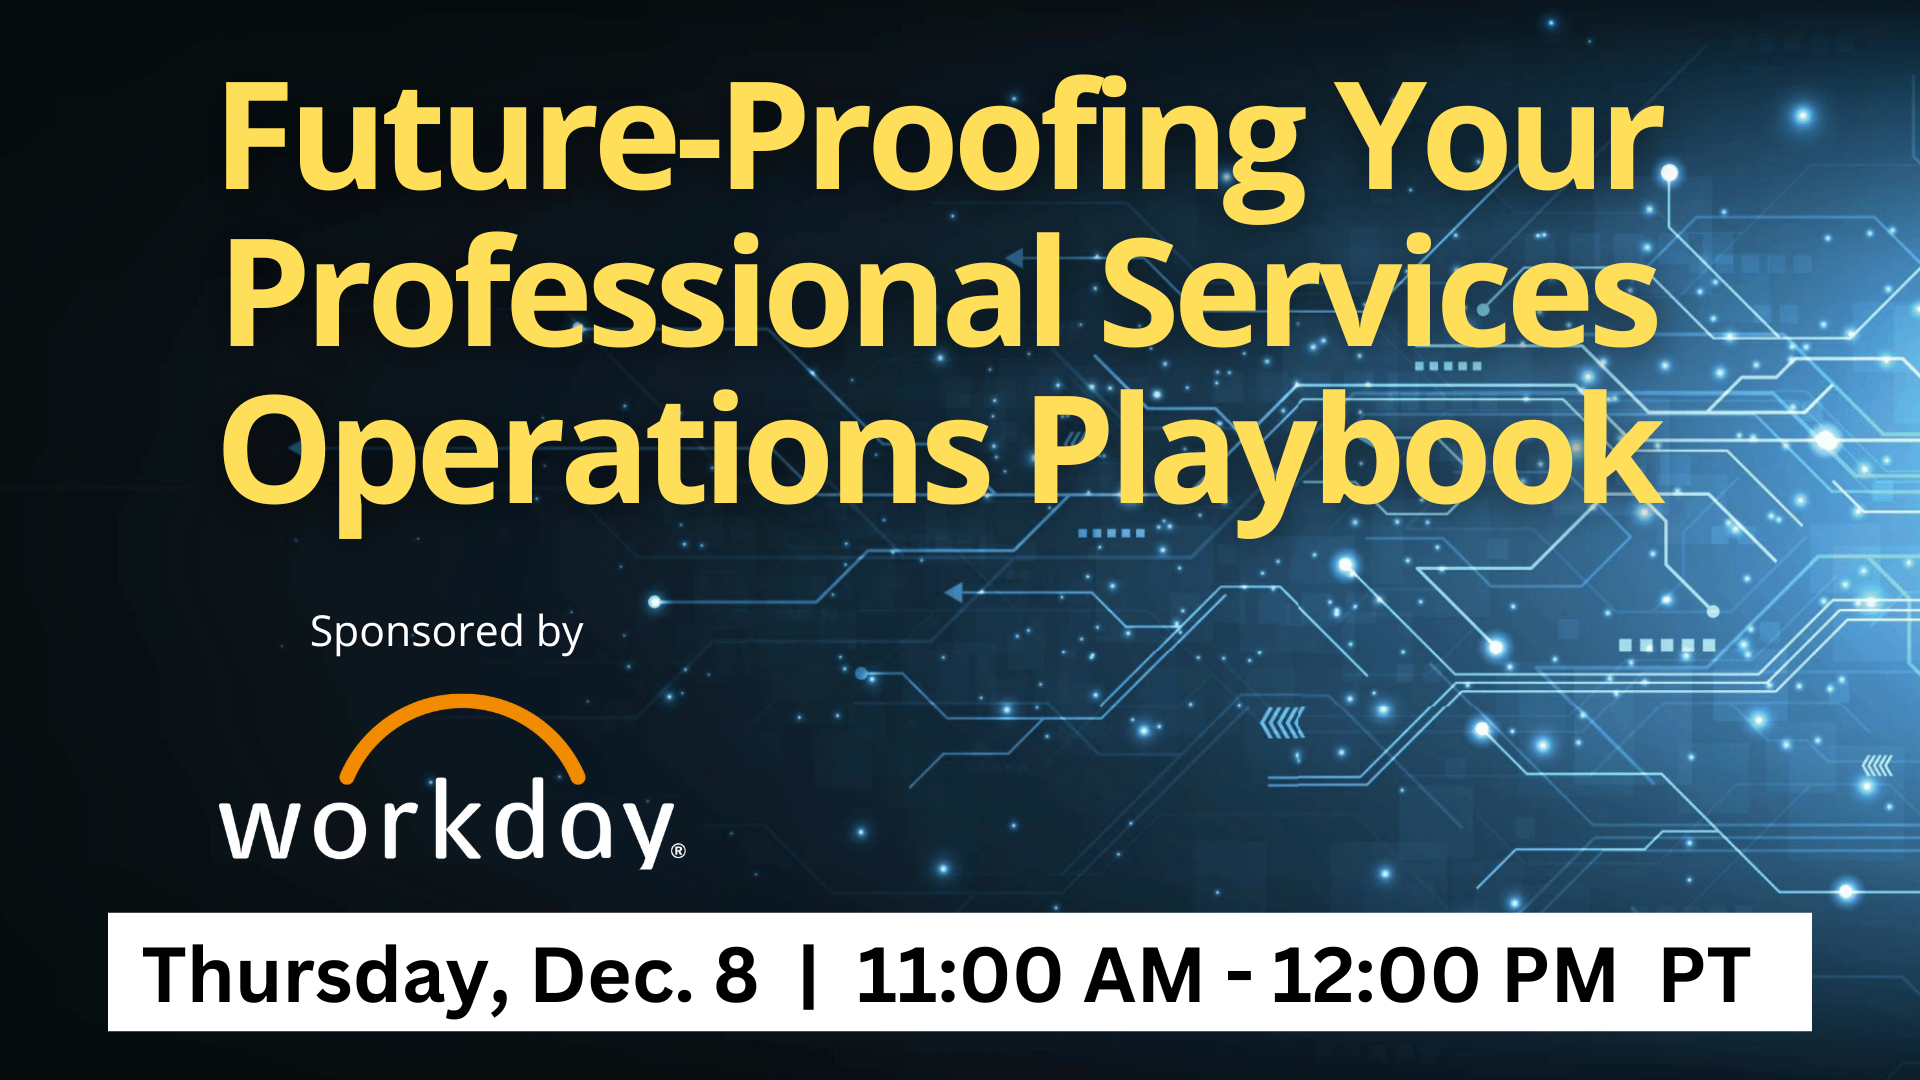 Webinar: Future-Proofing Your Professional Services Operations Playbook